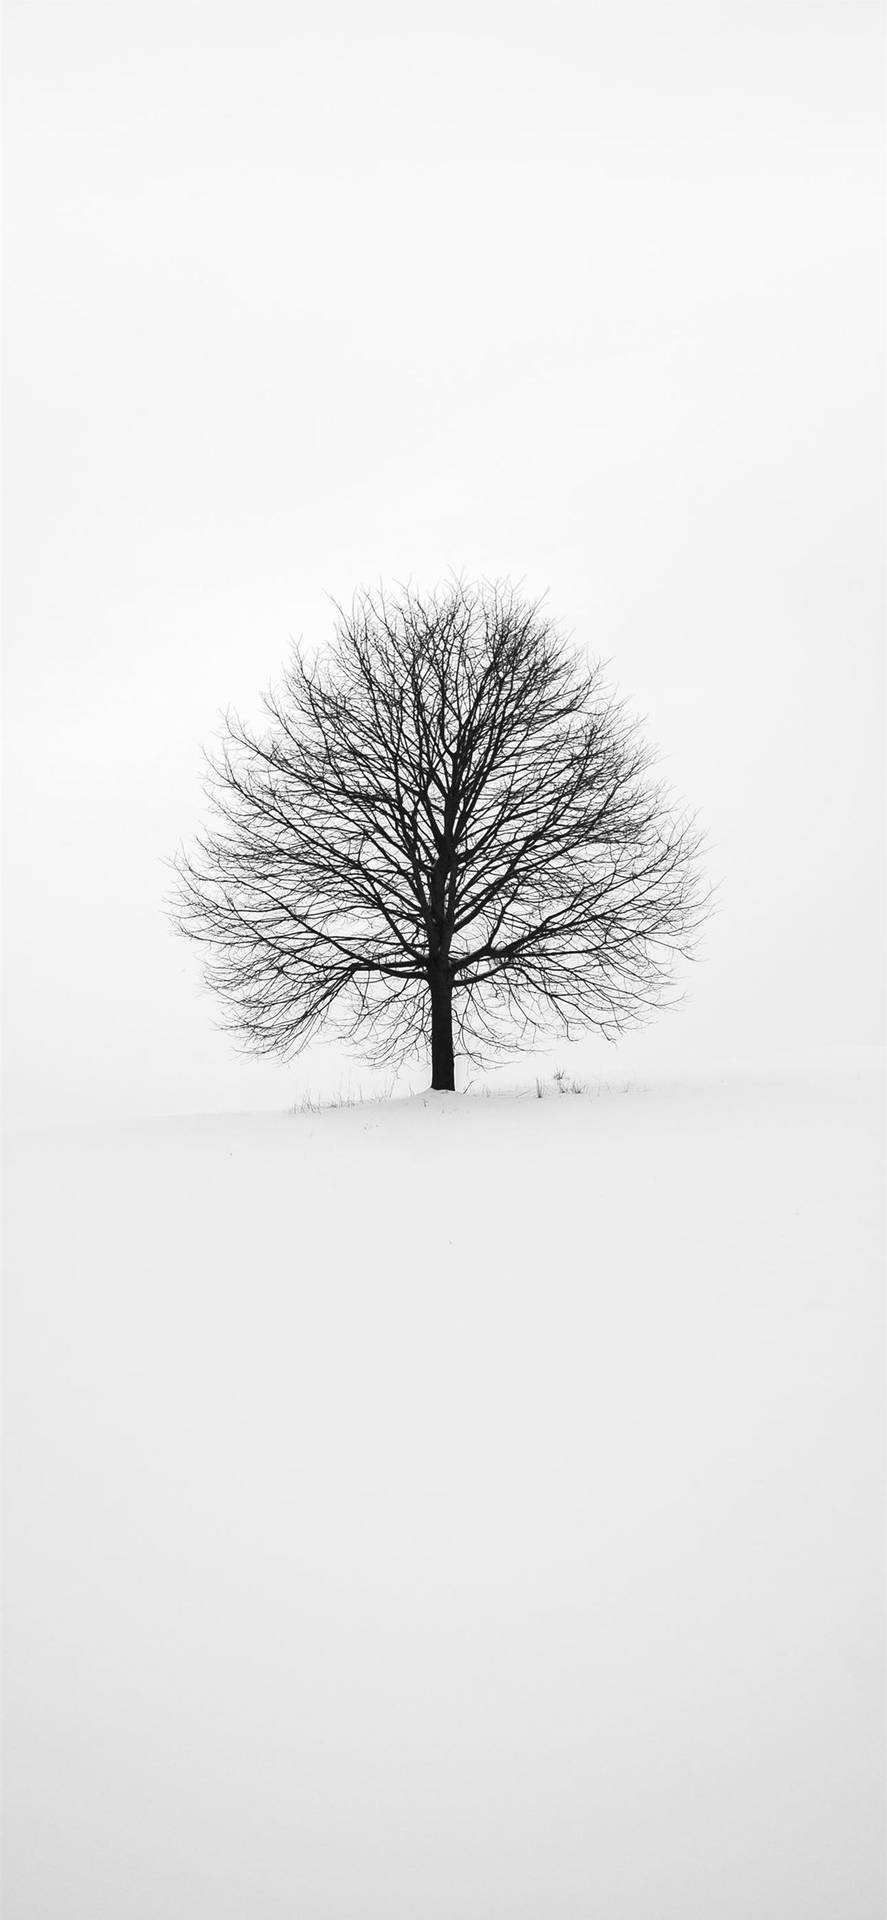 Black And White Tree Iphone 2021 Wallpaper